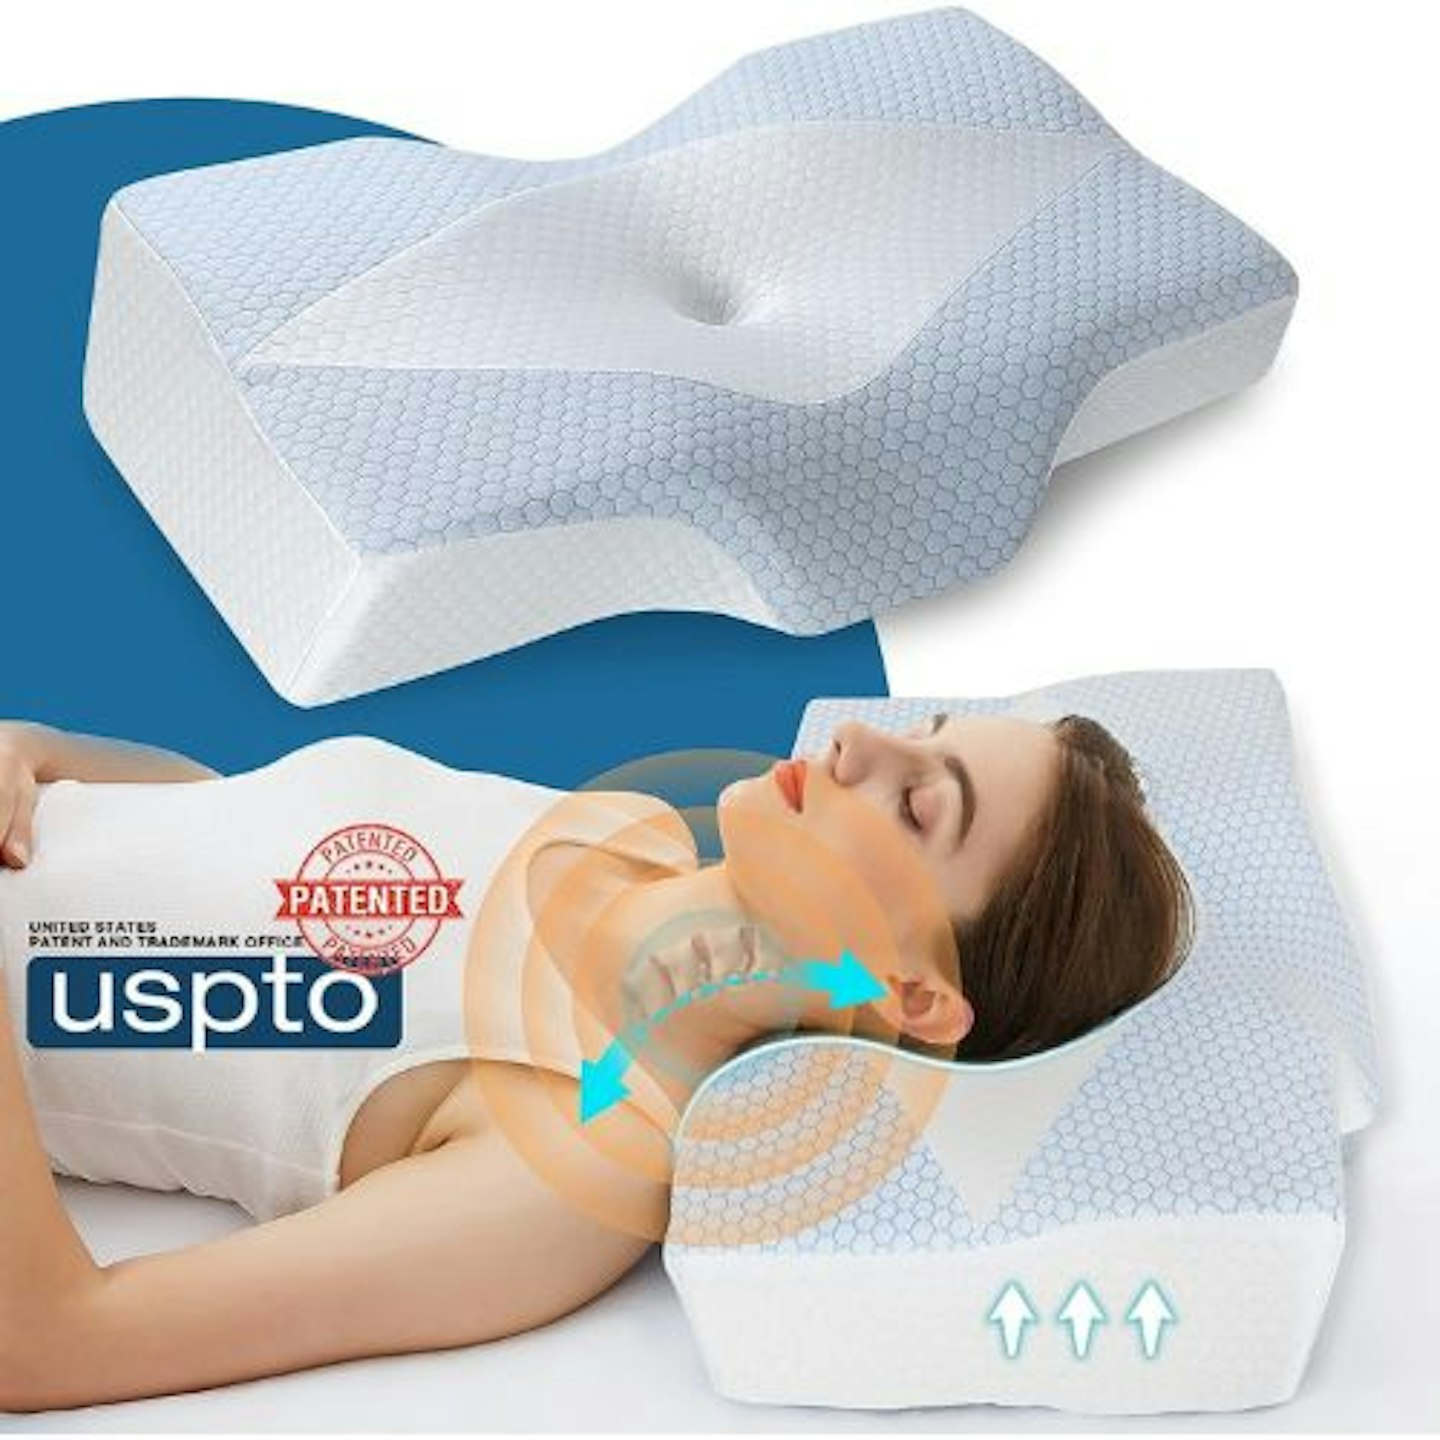 Best cooling pillows:  Cooling Cervical Memory Foam Pillow for Neck Pain Relief